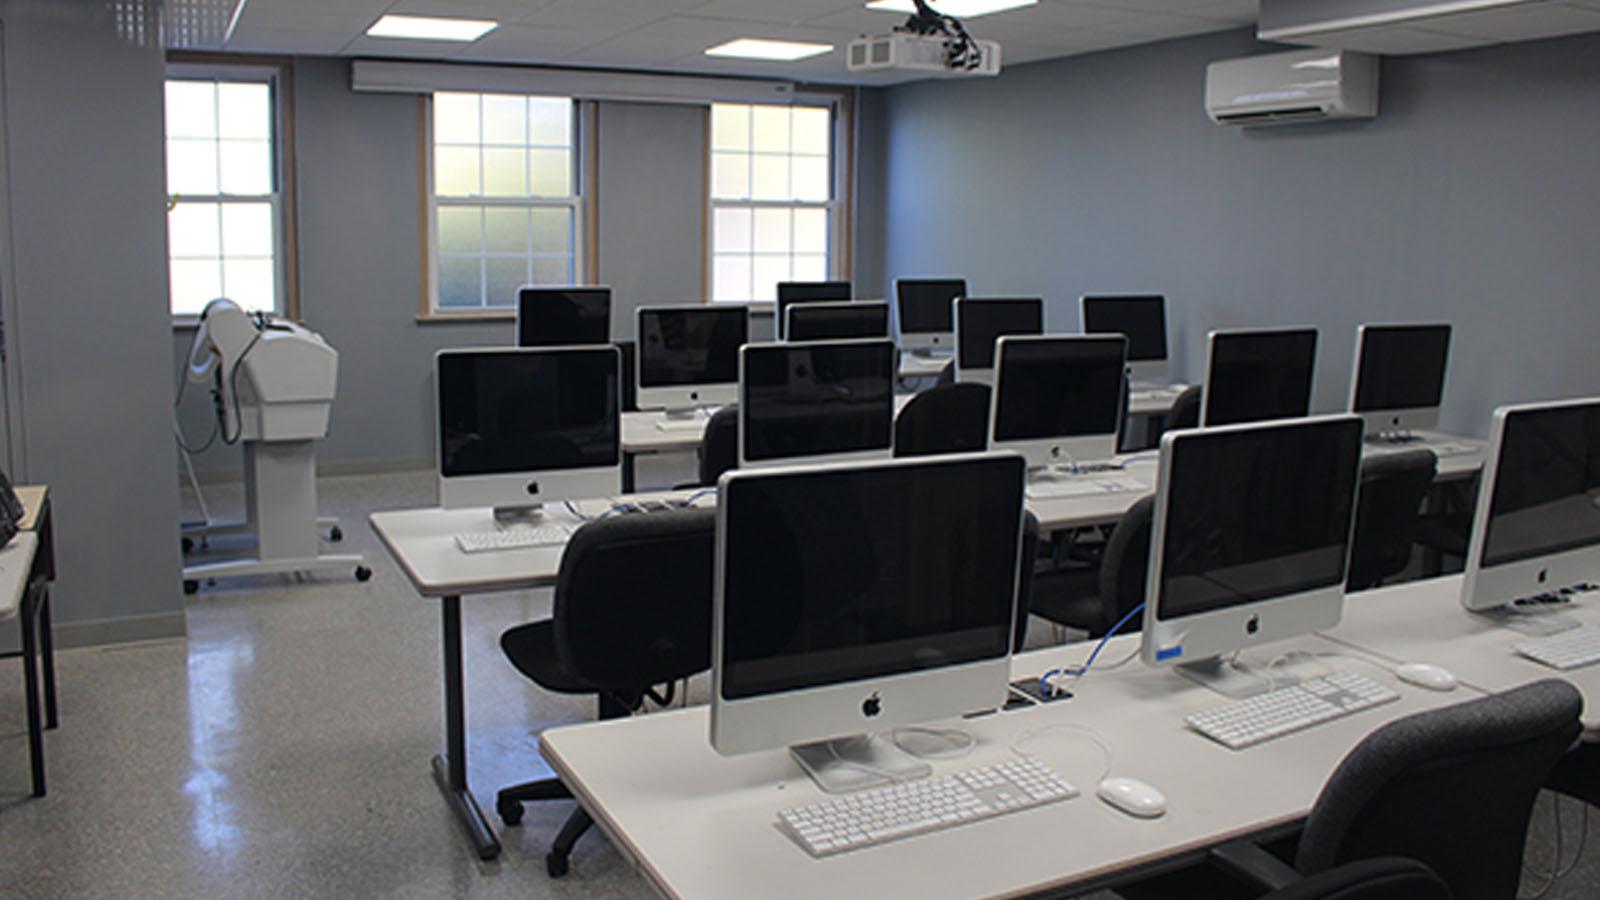 Mac computers lined up on long tables in a well lit classroom